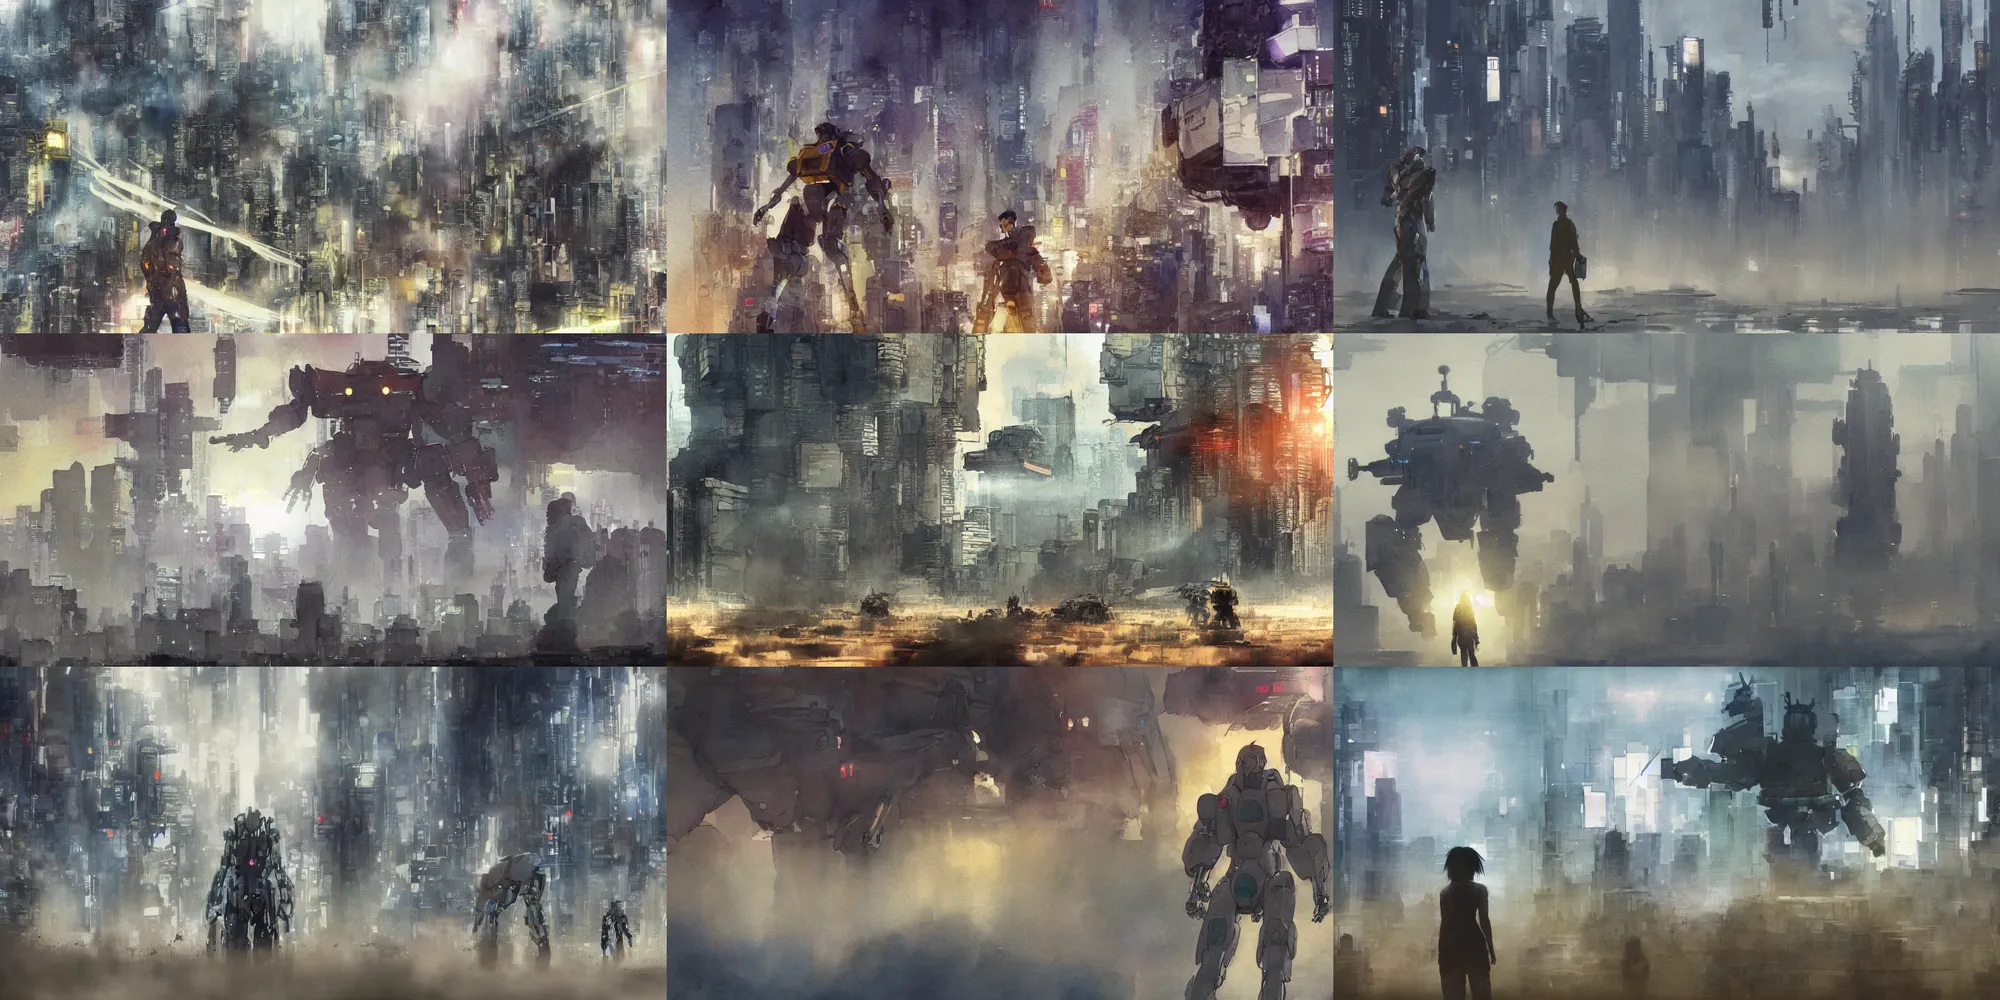 Prompt: incredible wide screenshot, ultrawide, simple watercolor, watercolor paper, rough paper texture, katsuhiro otomo ghost in the shell movie scene, backlit distant shot of a giant robot invasion side view, robots fight, mecha, geiger,robot eyes, robot head, robot shadow, robot crusher, robot stomp, panic, looking up, yellow parasol in deserted dusty shinjuku junk town, broken vending machines, bold graphic graffiti, old pawn shop, bright sun bleached ground, mud, fog, dust, windy, scary robot monster lurks in the background, ghost mask, teeth, animatronic, black smoke, pale beige sky, junk tv, texture, shell, brown mud, dust, tangled overhead wires, telephone pole, dusty, dry, pencil marks, genius party,shinjuku, koju morimoto, katsuya terada, masamune shirow, tatsuyuki tanaka hd, 4k, remaster, dynamic camera angle, deep 3 point perspective, fish eye, dynamic scene